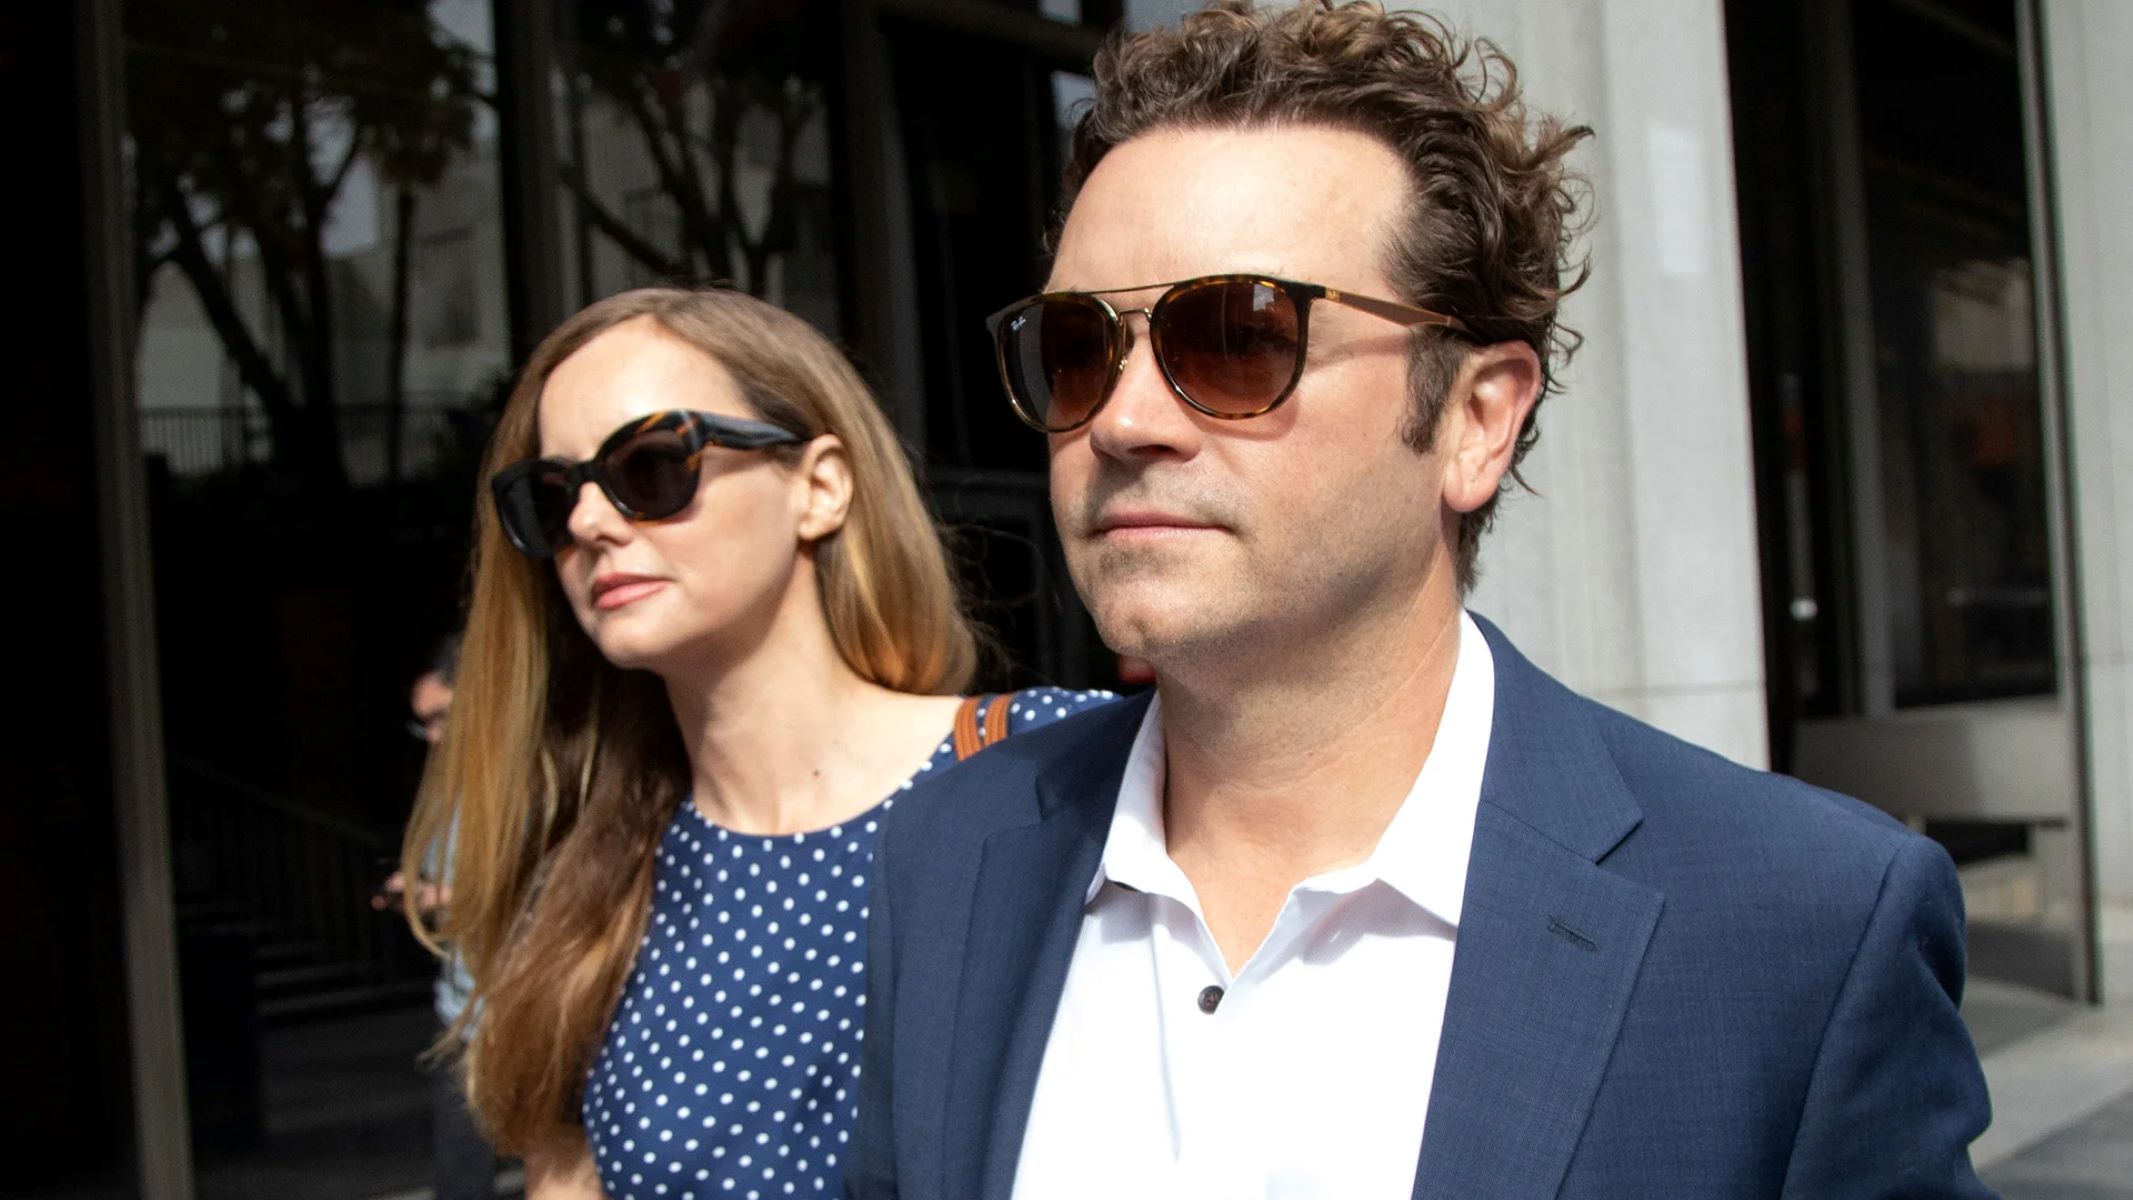 Danny Masterson’s Wife Bijou Phillips Files For Divorce After His 30-Year Rape Sentence